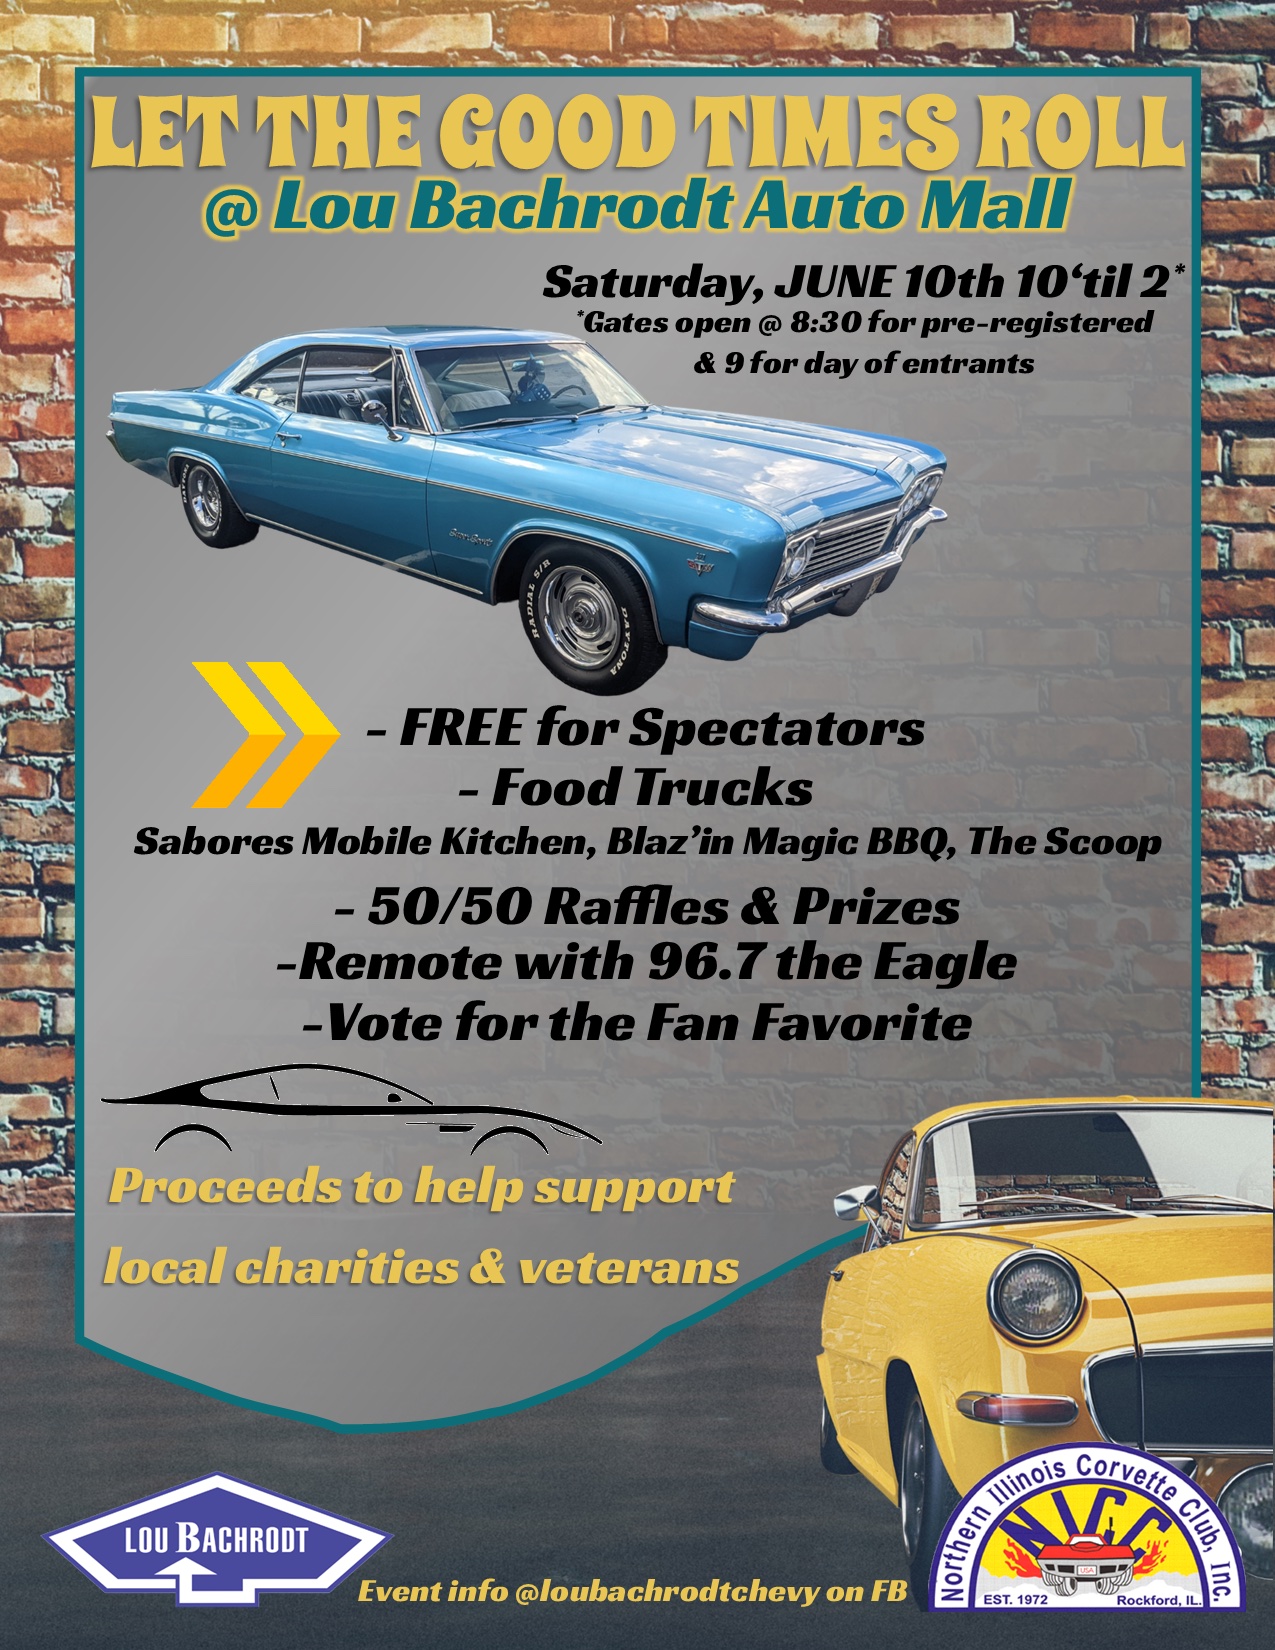 This is the flyer for the third annual Let the Good Times Roll Car show hosted by Lou Bachrodt Auto Mall and the Northern Illinois Corvette Club. This even will be on June 10, 2023 from 10-2